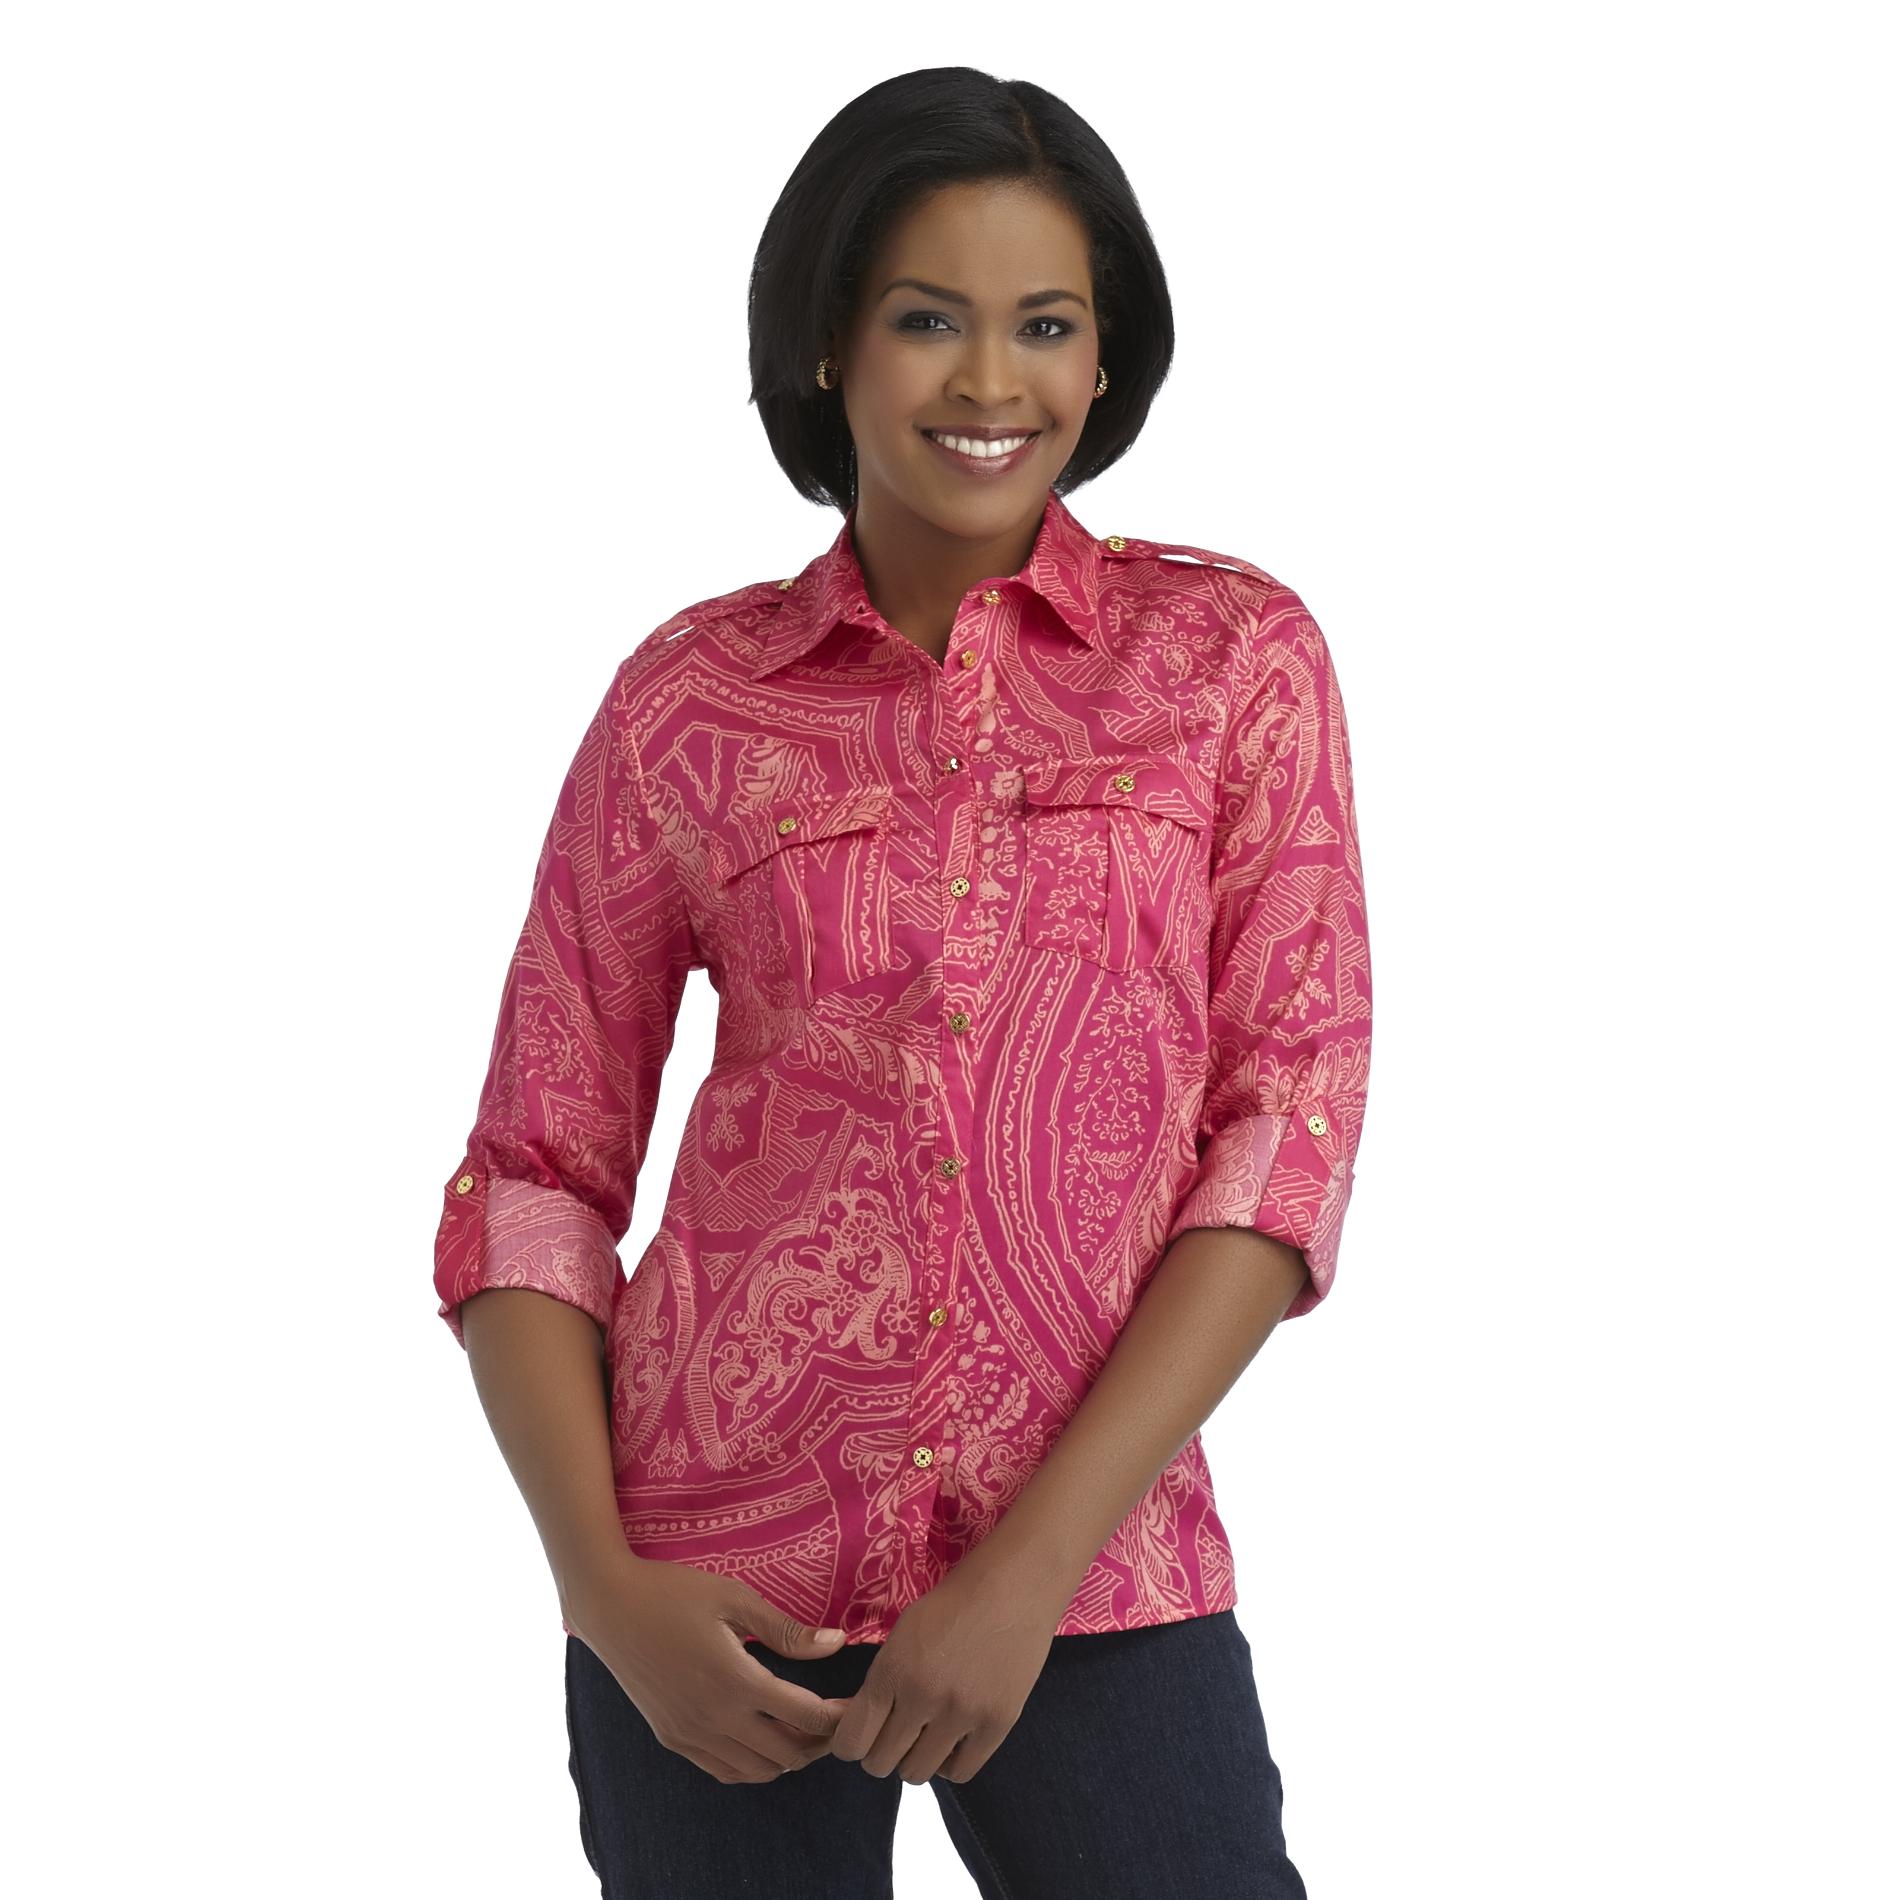 Jaclyn Smith Women's Utility Shirt - Paisley Floral